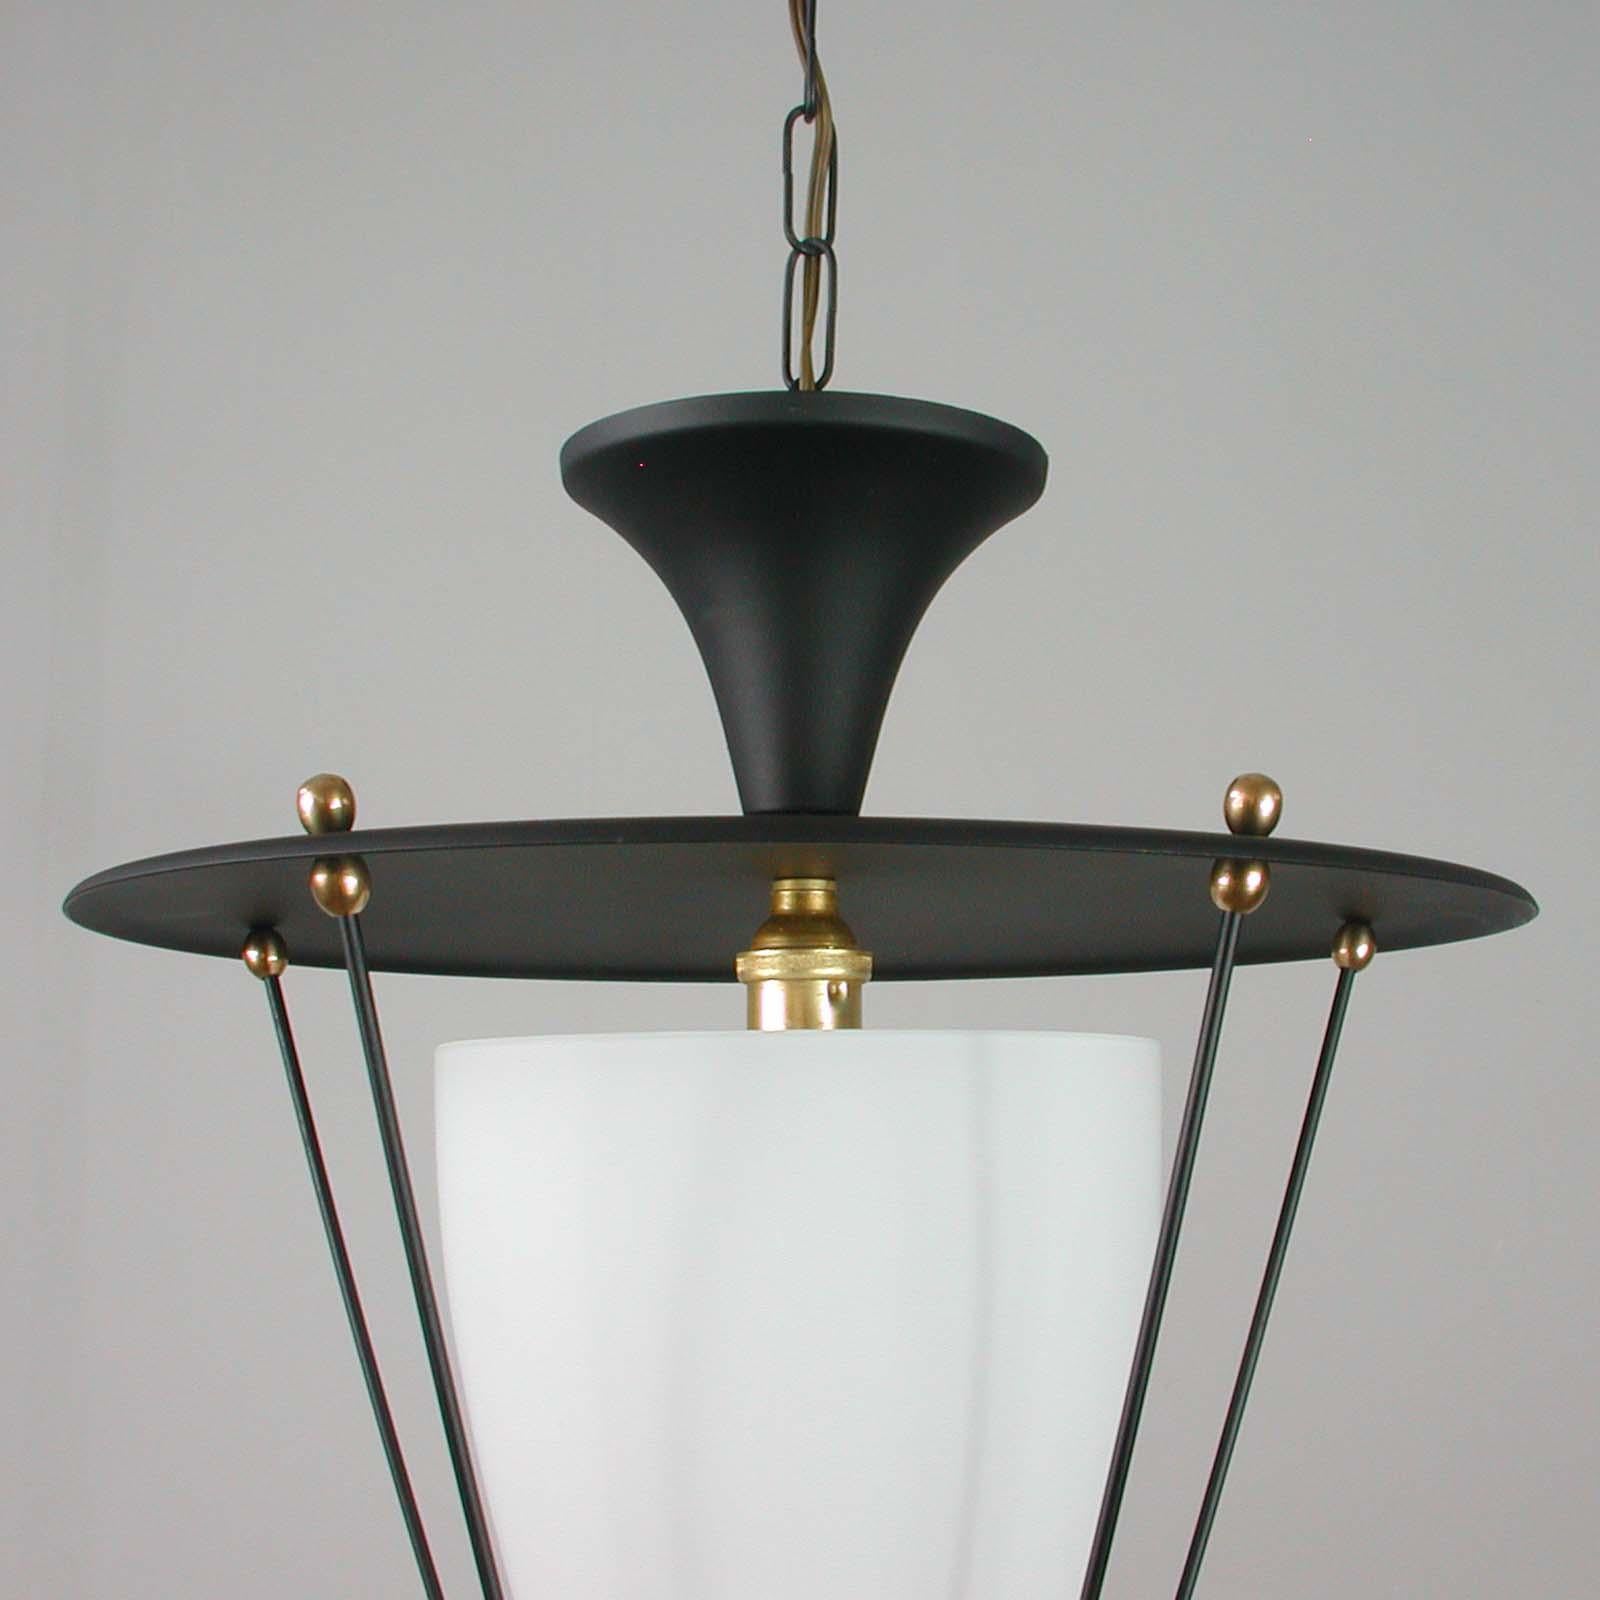 Lacquered Midcentury French Black and White Lantern with Brass Details, 1950s